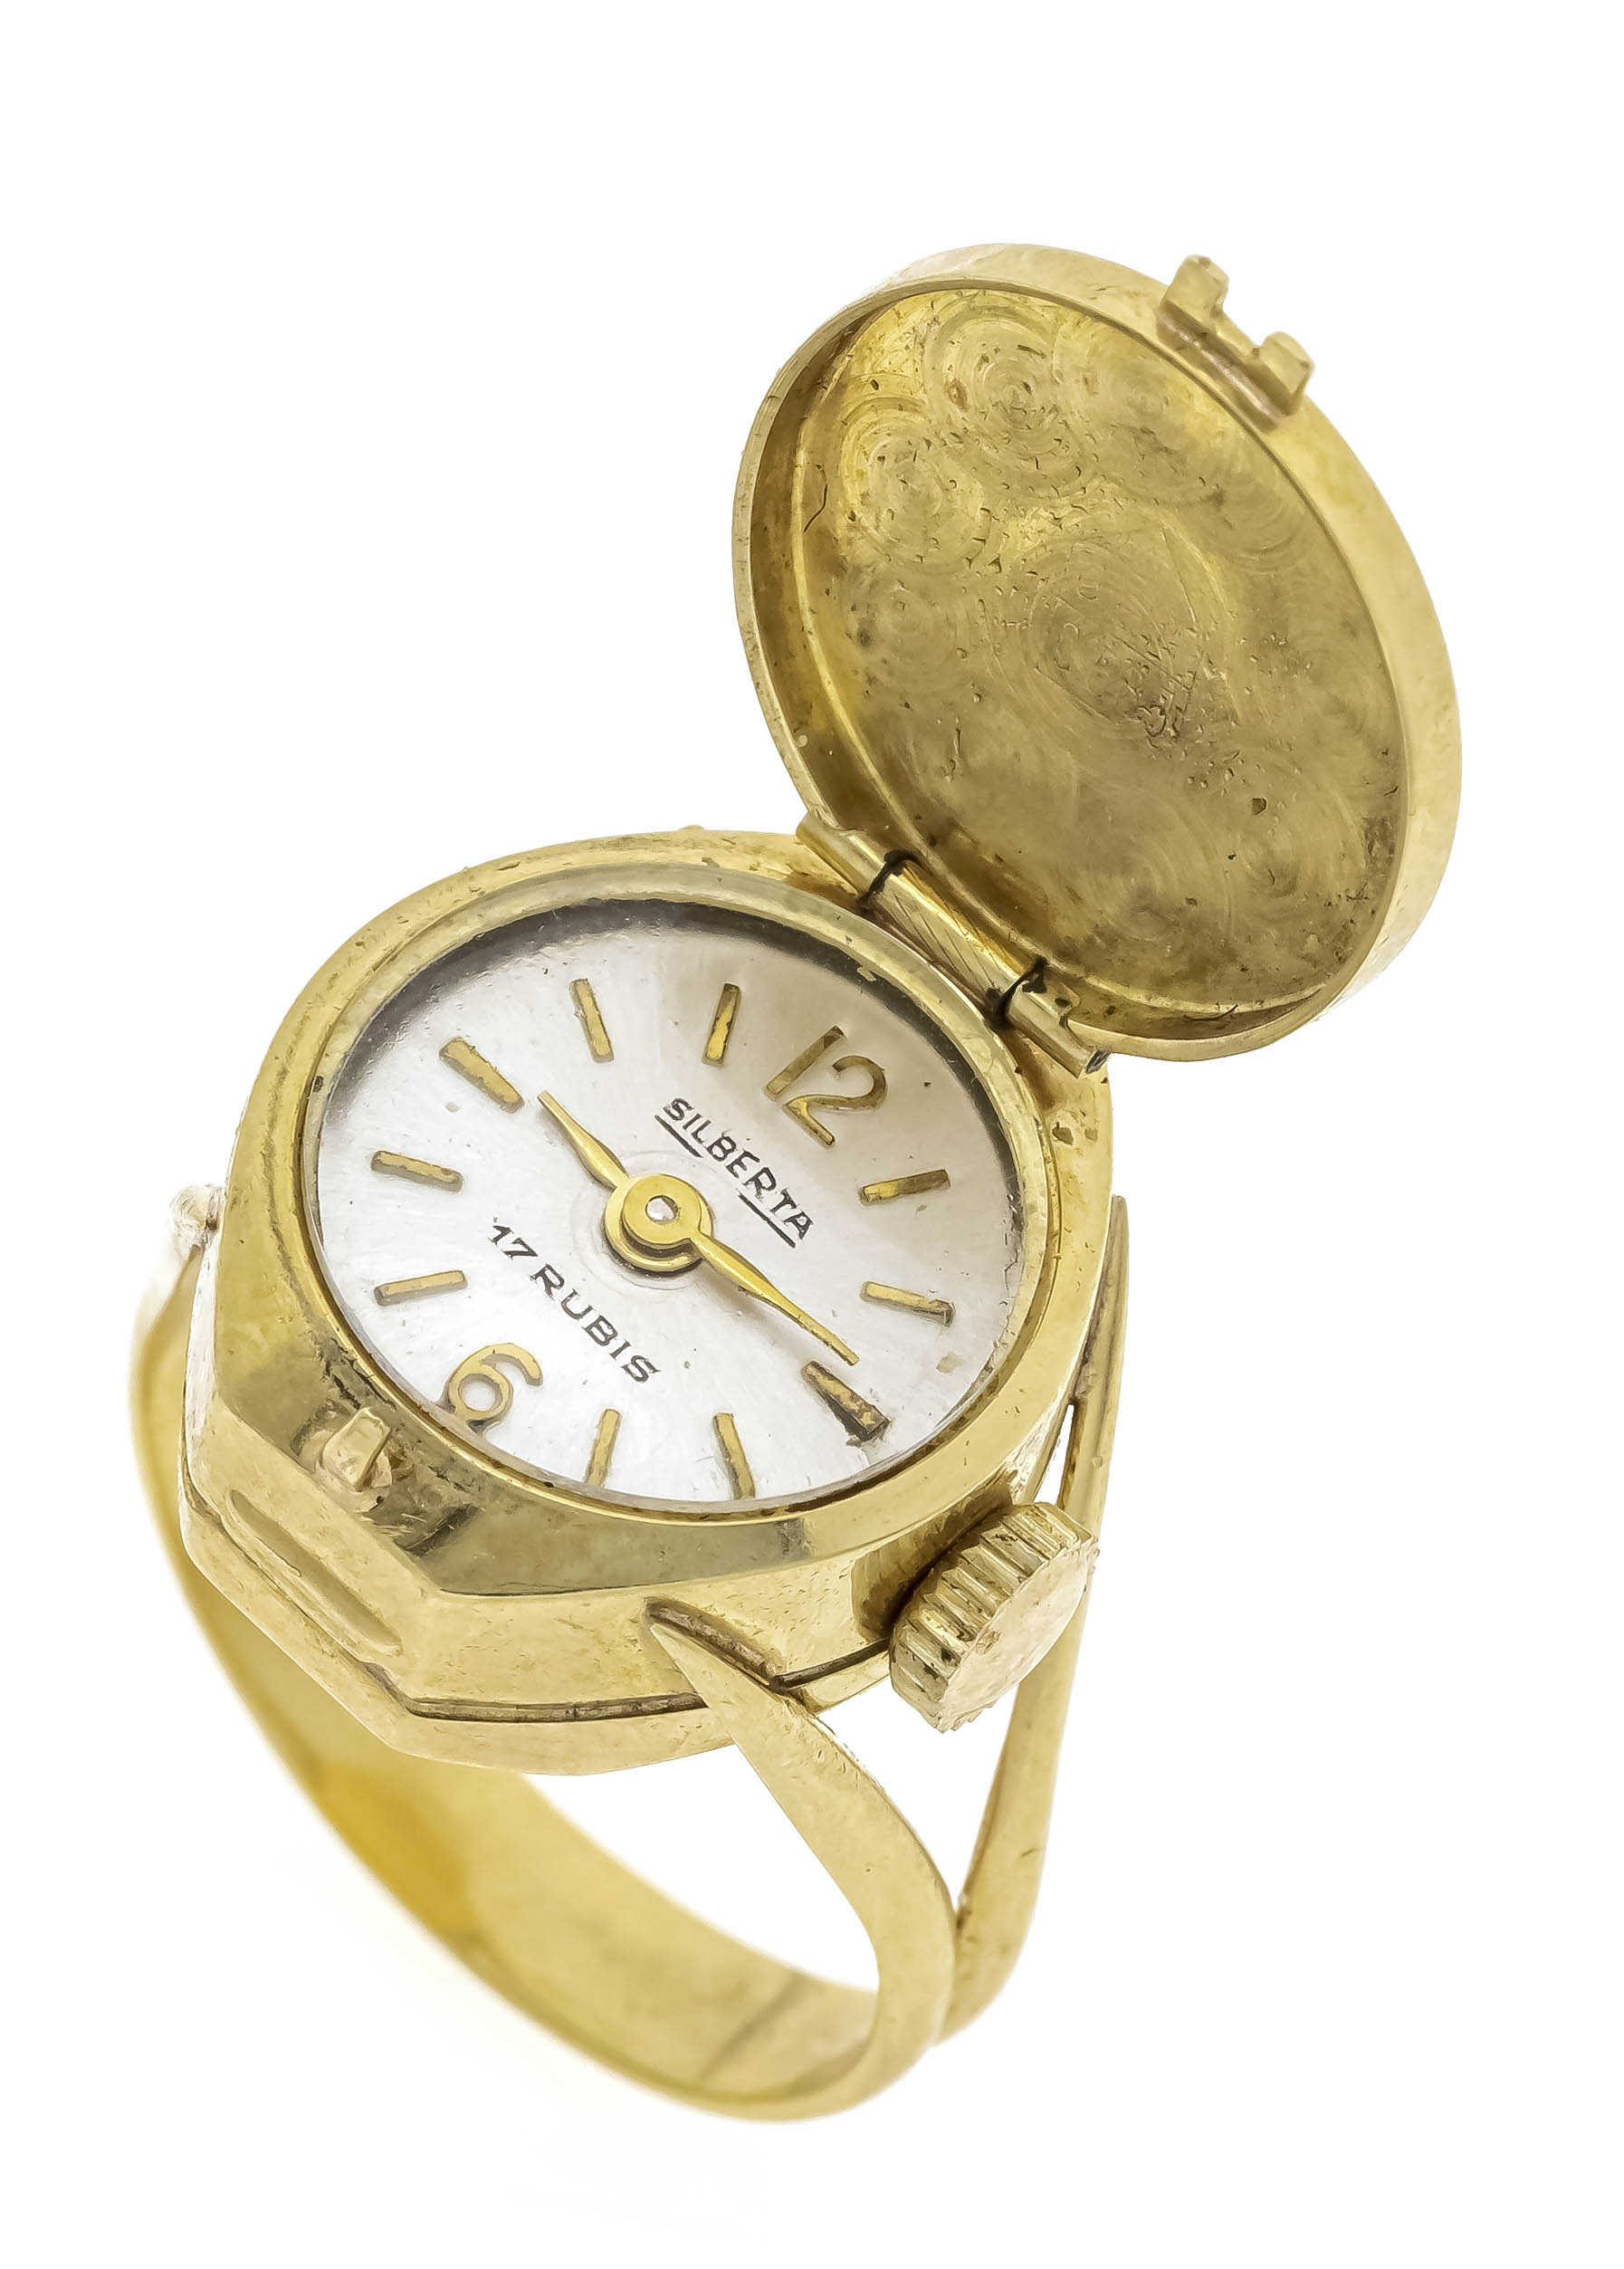 Watch ring GG 585/000 with a silver ladies' watch, manual winding calibre PUW 74 running, white dial